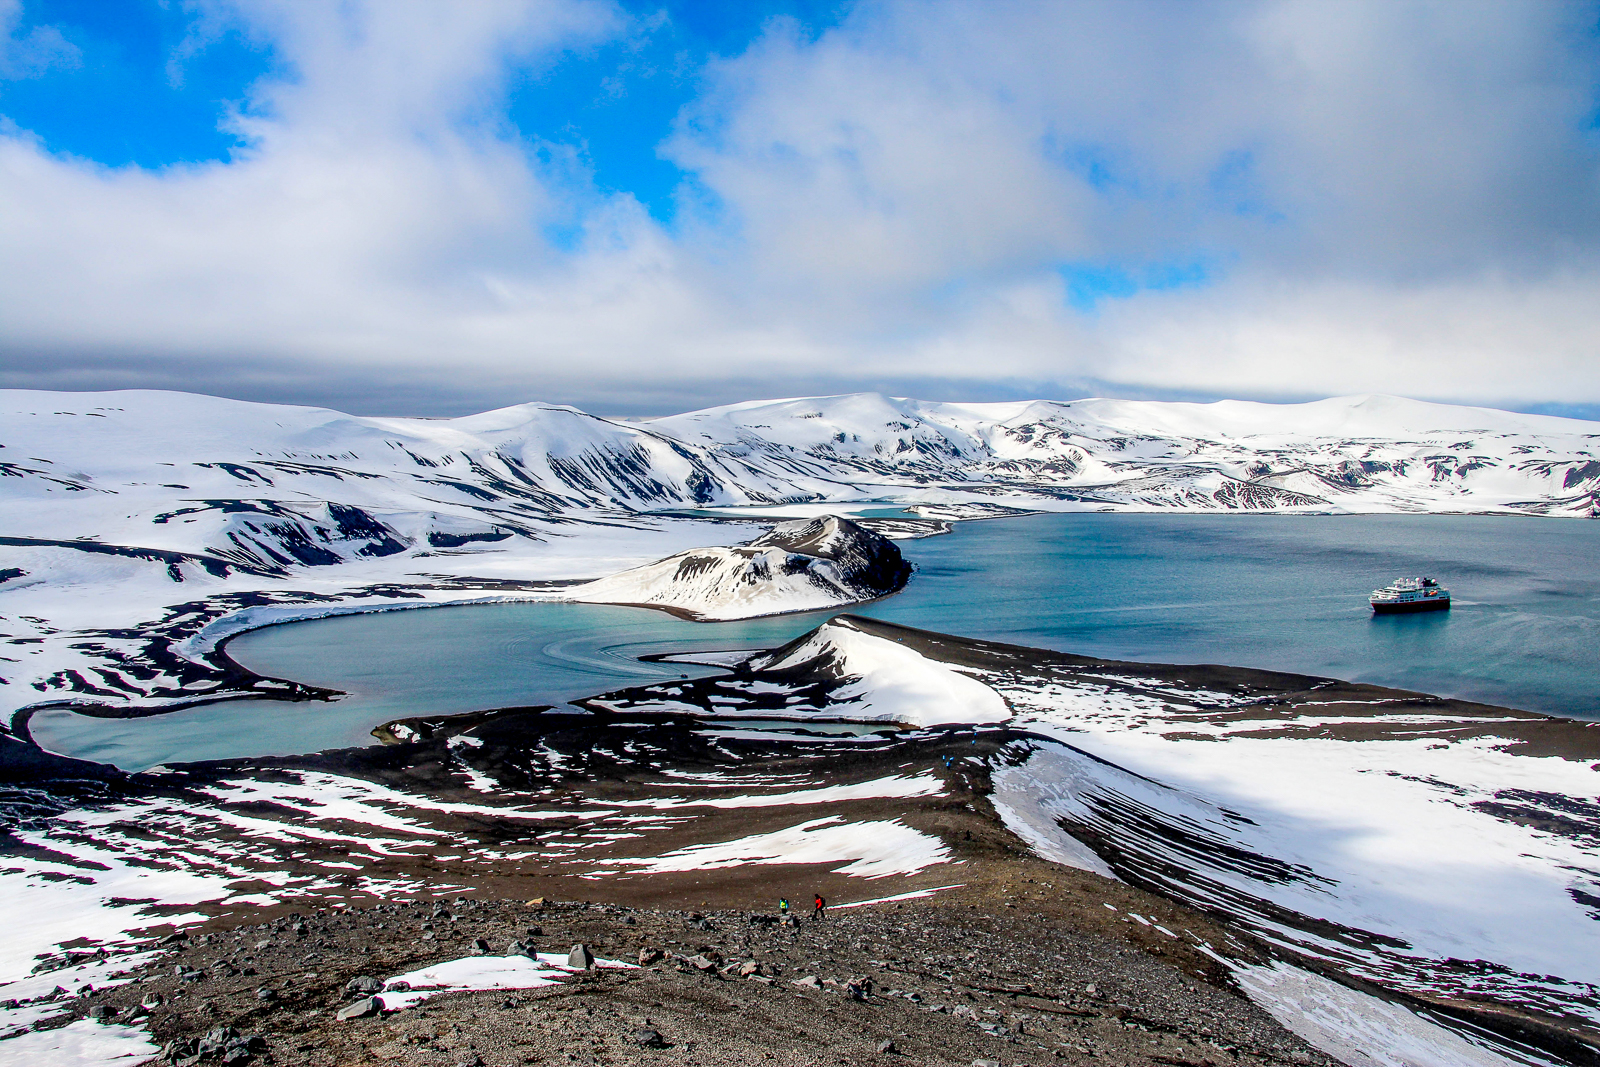 An Antarctic cruiser in the bay of Deception Island